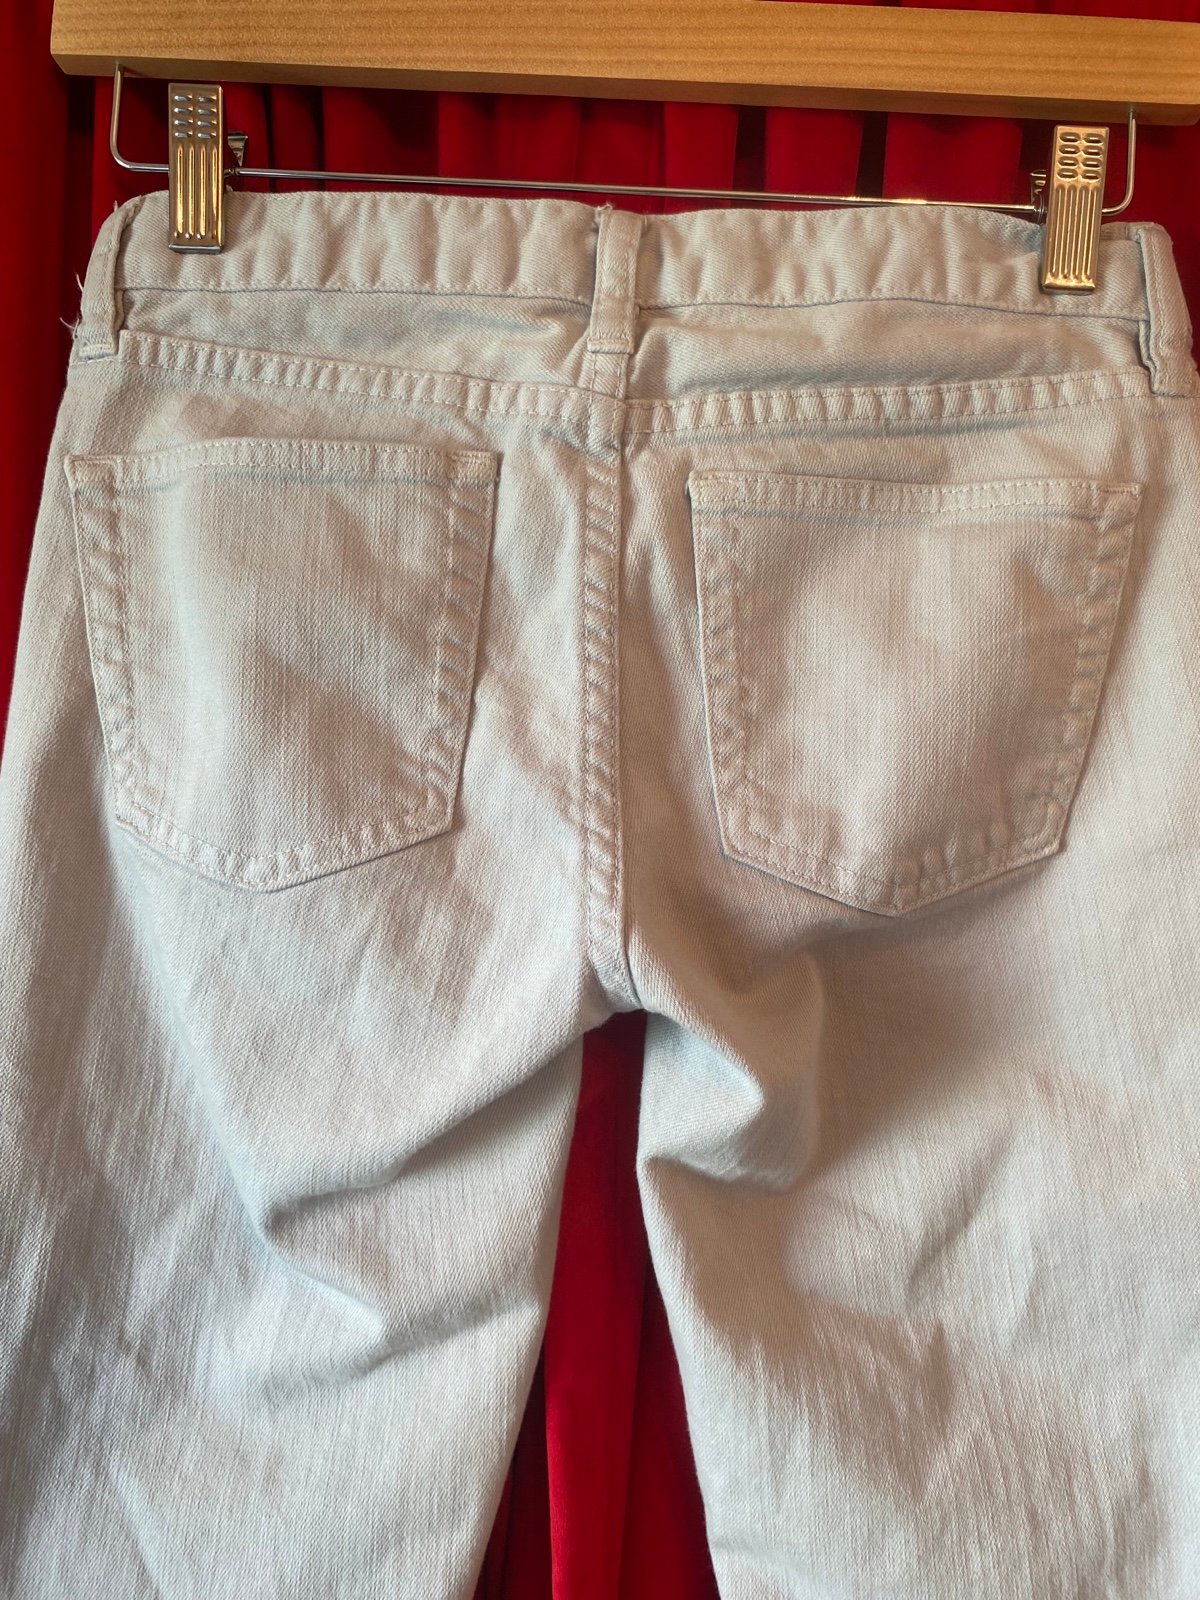 reasonable price J CREW GRAY MATCHSTICK SKINNY CROPPED JEANS 00/24 nuLlaU3t8 hot sale